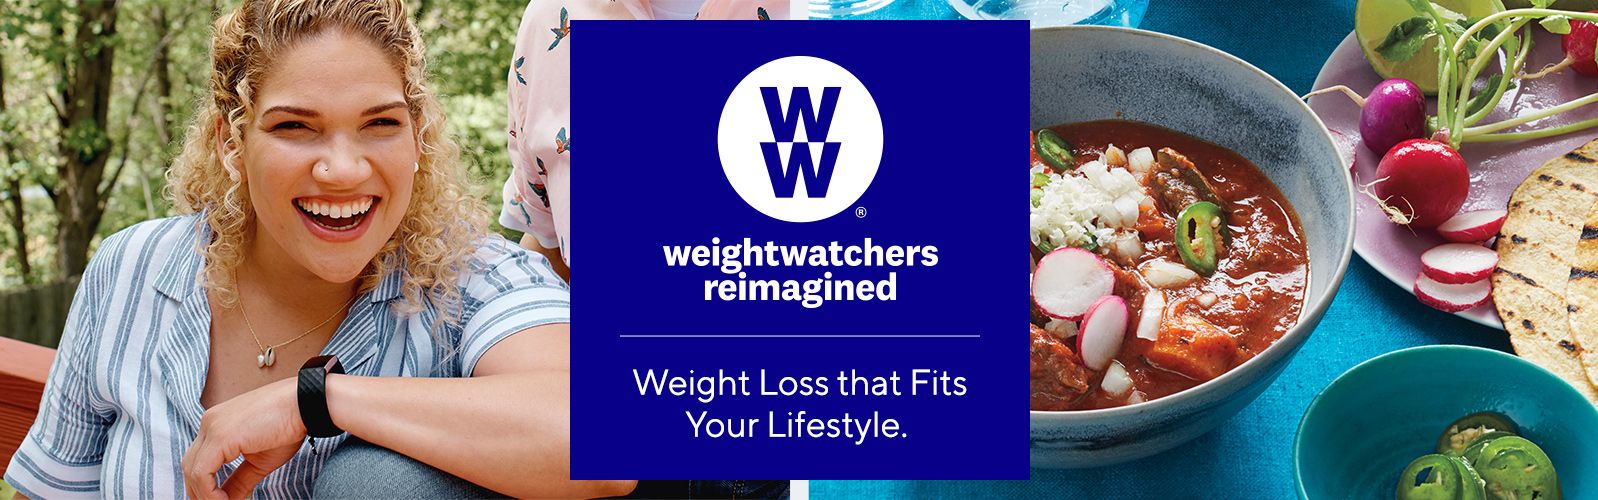 silver sneakers weight watchers